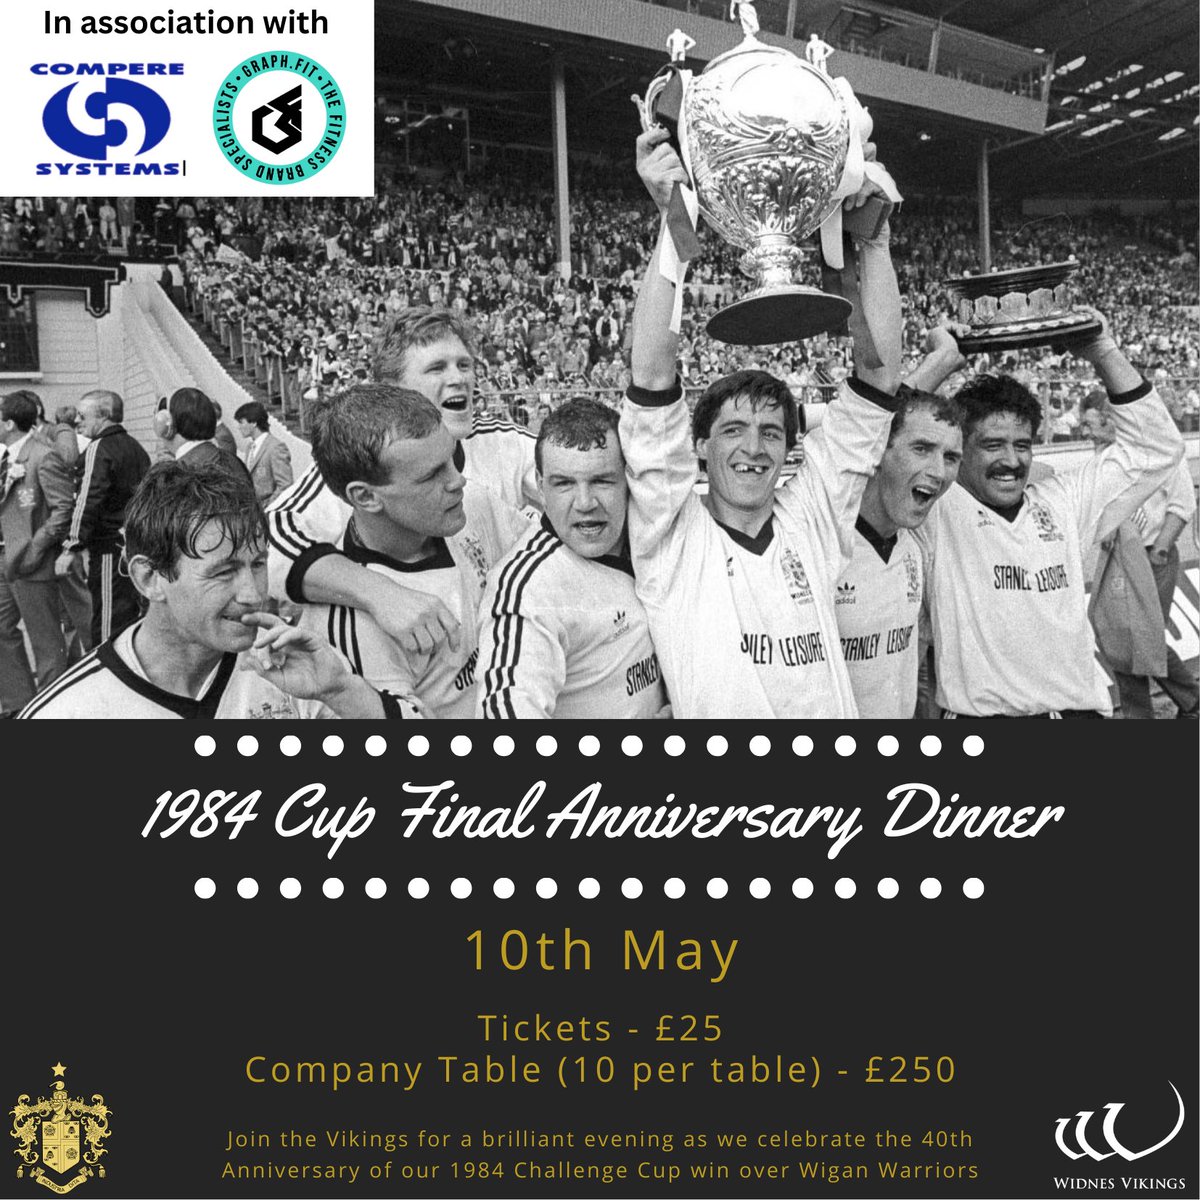 ‼️ Today is your last chance to join us for Friday's exclusive dinner and celebration night with Vikings legends from our famous 1984 cup-winning side! 🏆 Get your tickets before MIDNIGHT tonight! 🎫 Tickets 👉 widnesvikings.co.uk/tickets/ #COYV 🧪